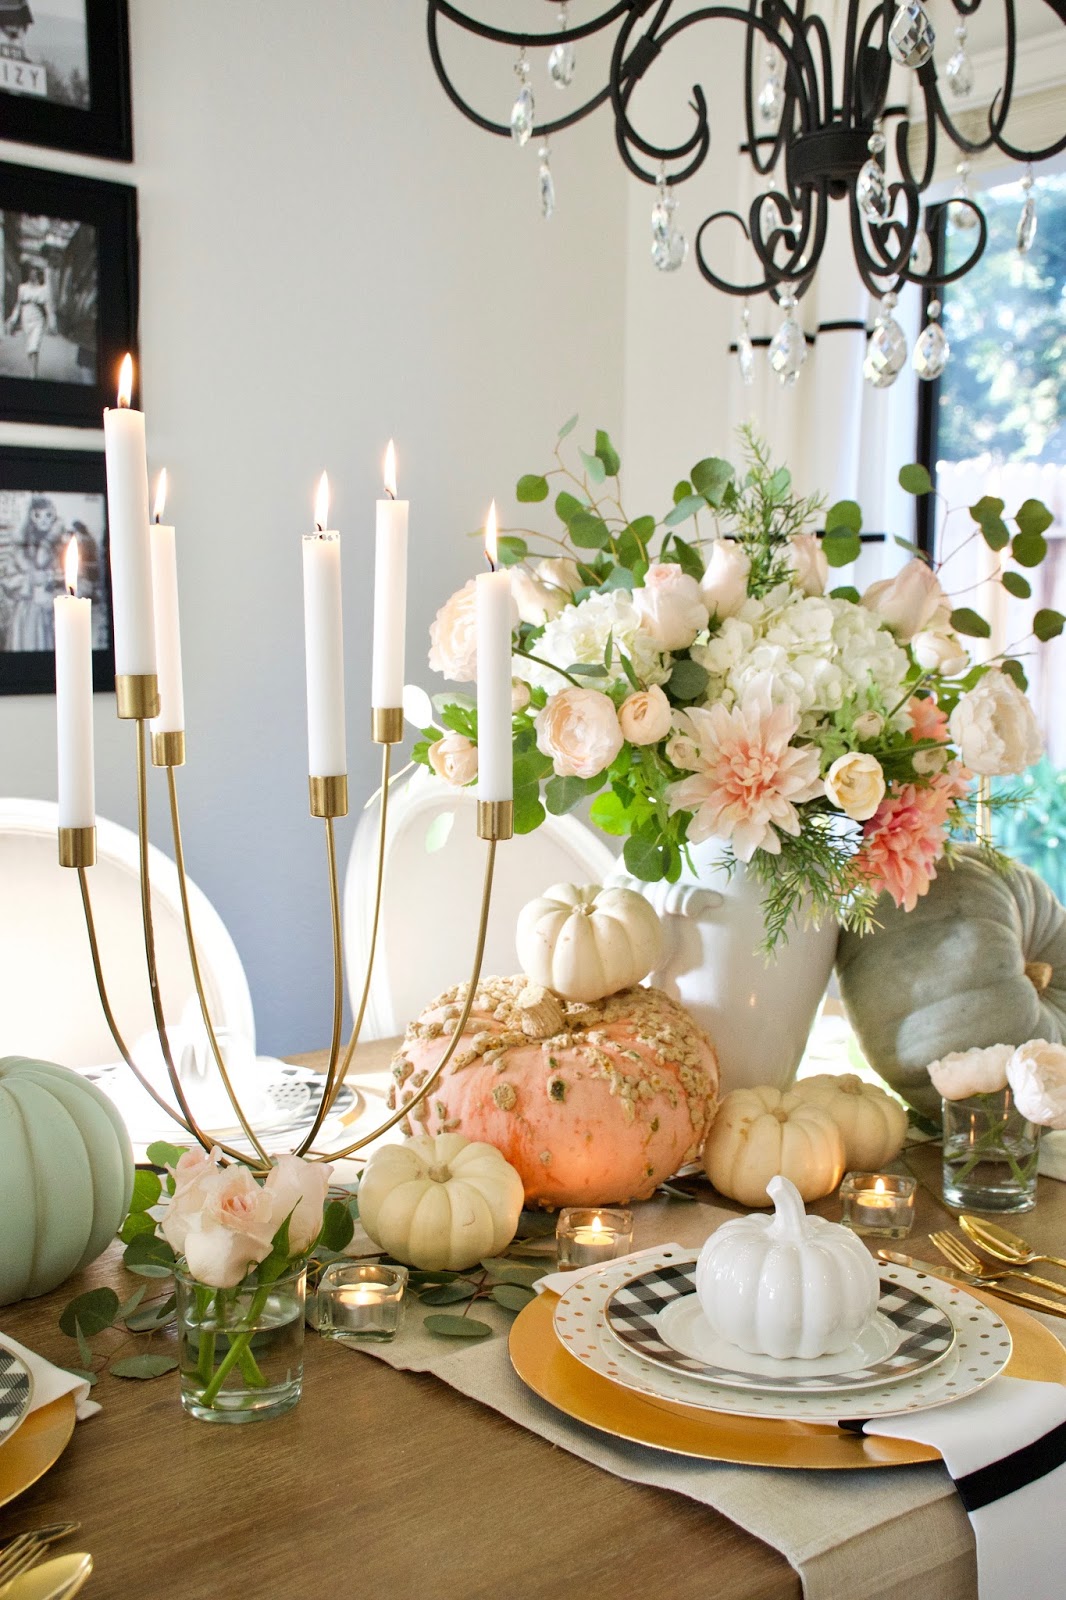 Home and Fabulous: GLAMOROUS THANKSGIVING DINNER TABLE